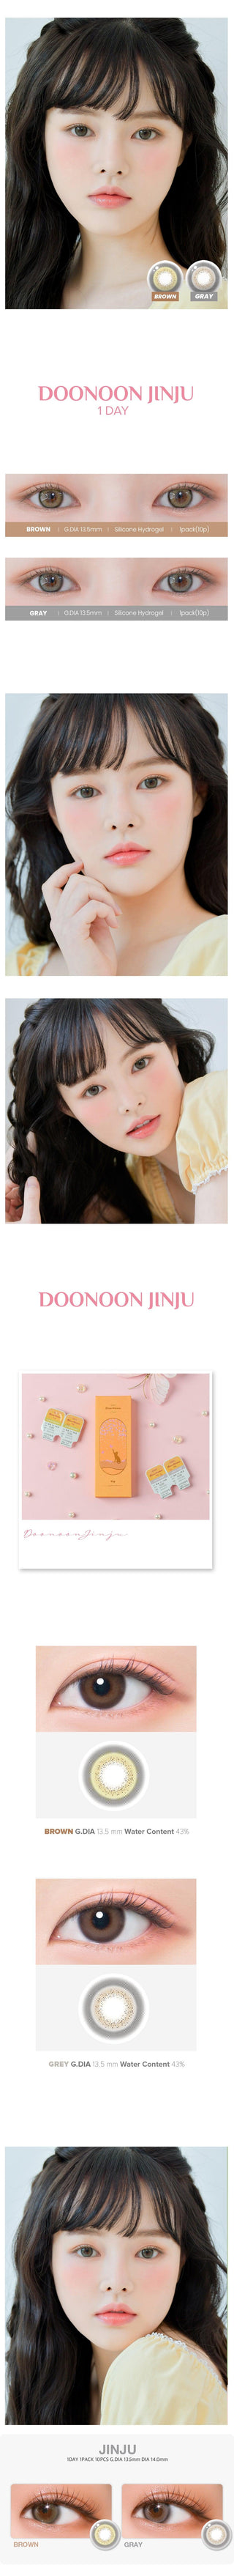 Variety of DooNoon Jinju 1-Day Brown (10pk) contact lens colors displayed, with closeups of an eye wearing the contact lens colors, and with a model wearing the contact lens colors showing realistic eye-enlarging effect from various angles.